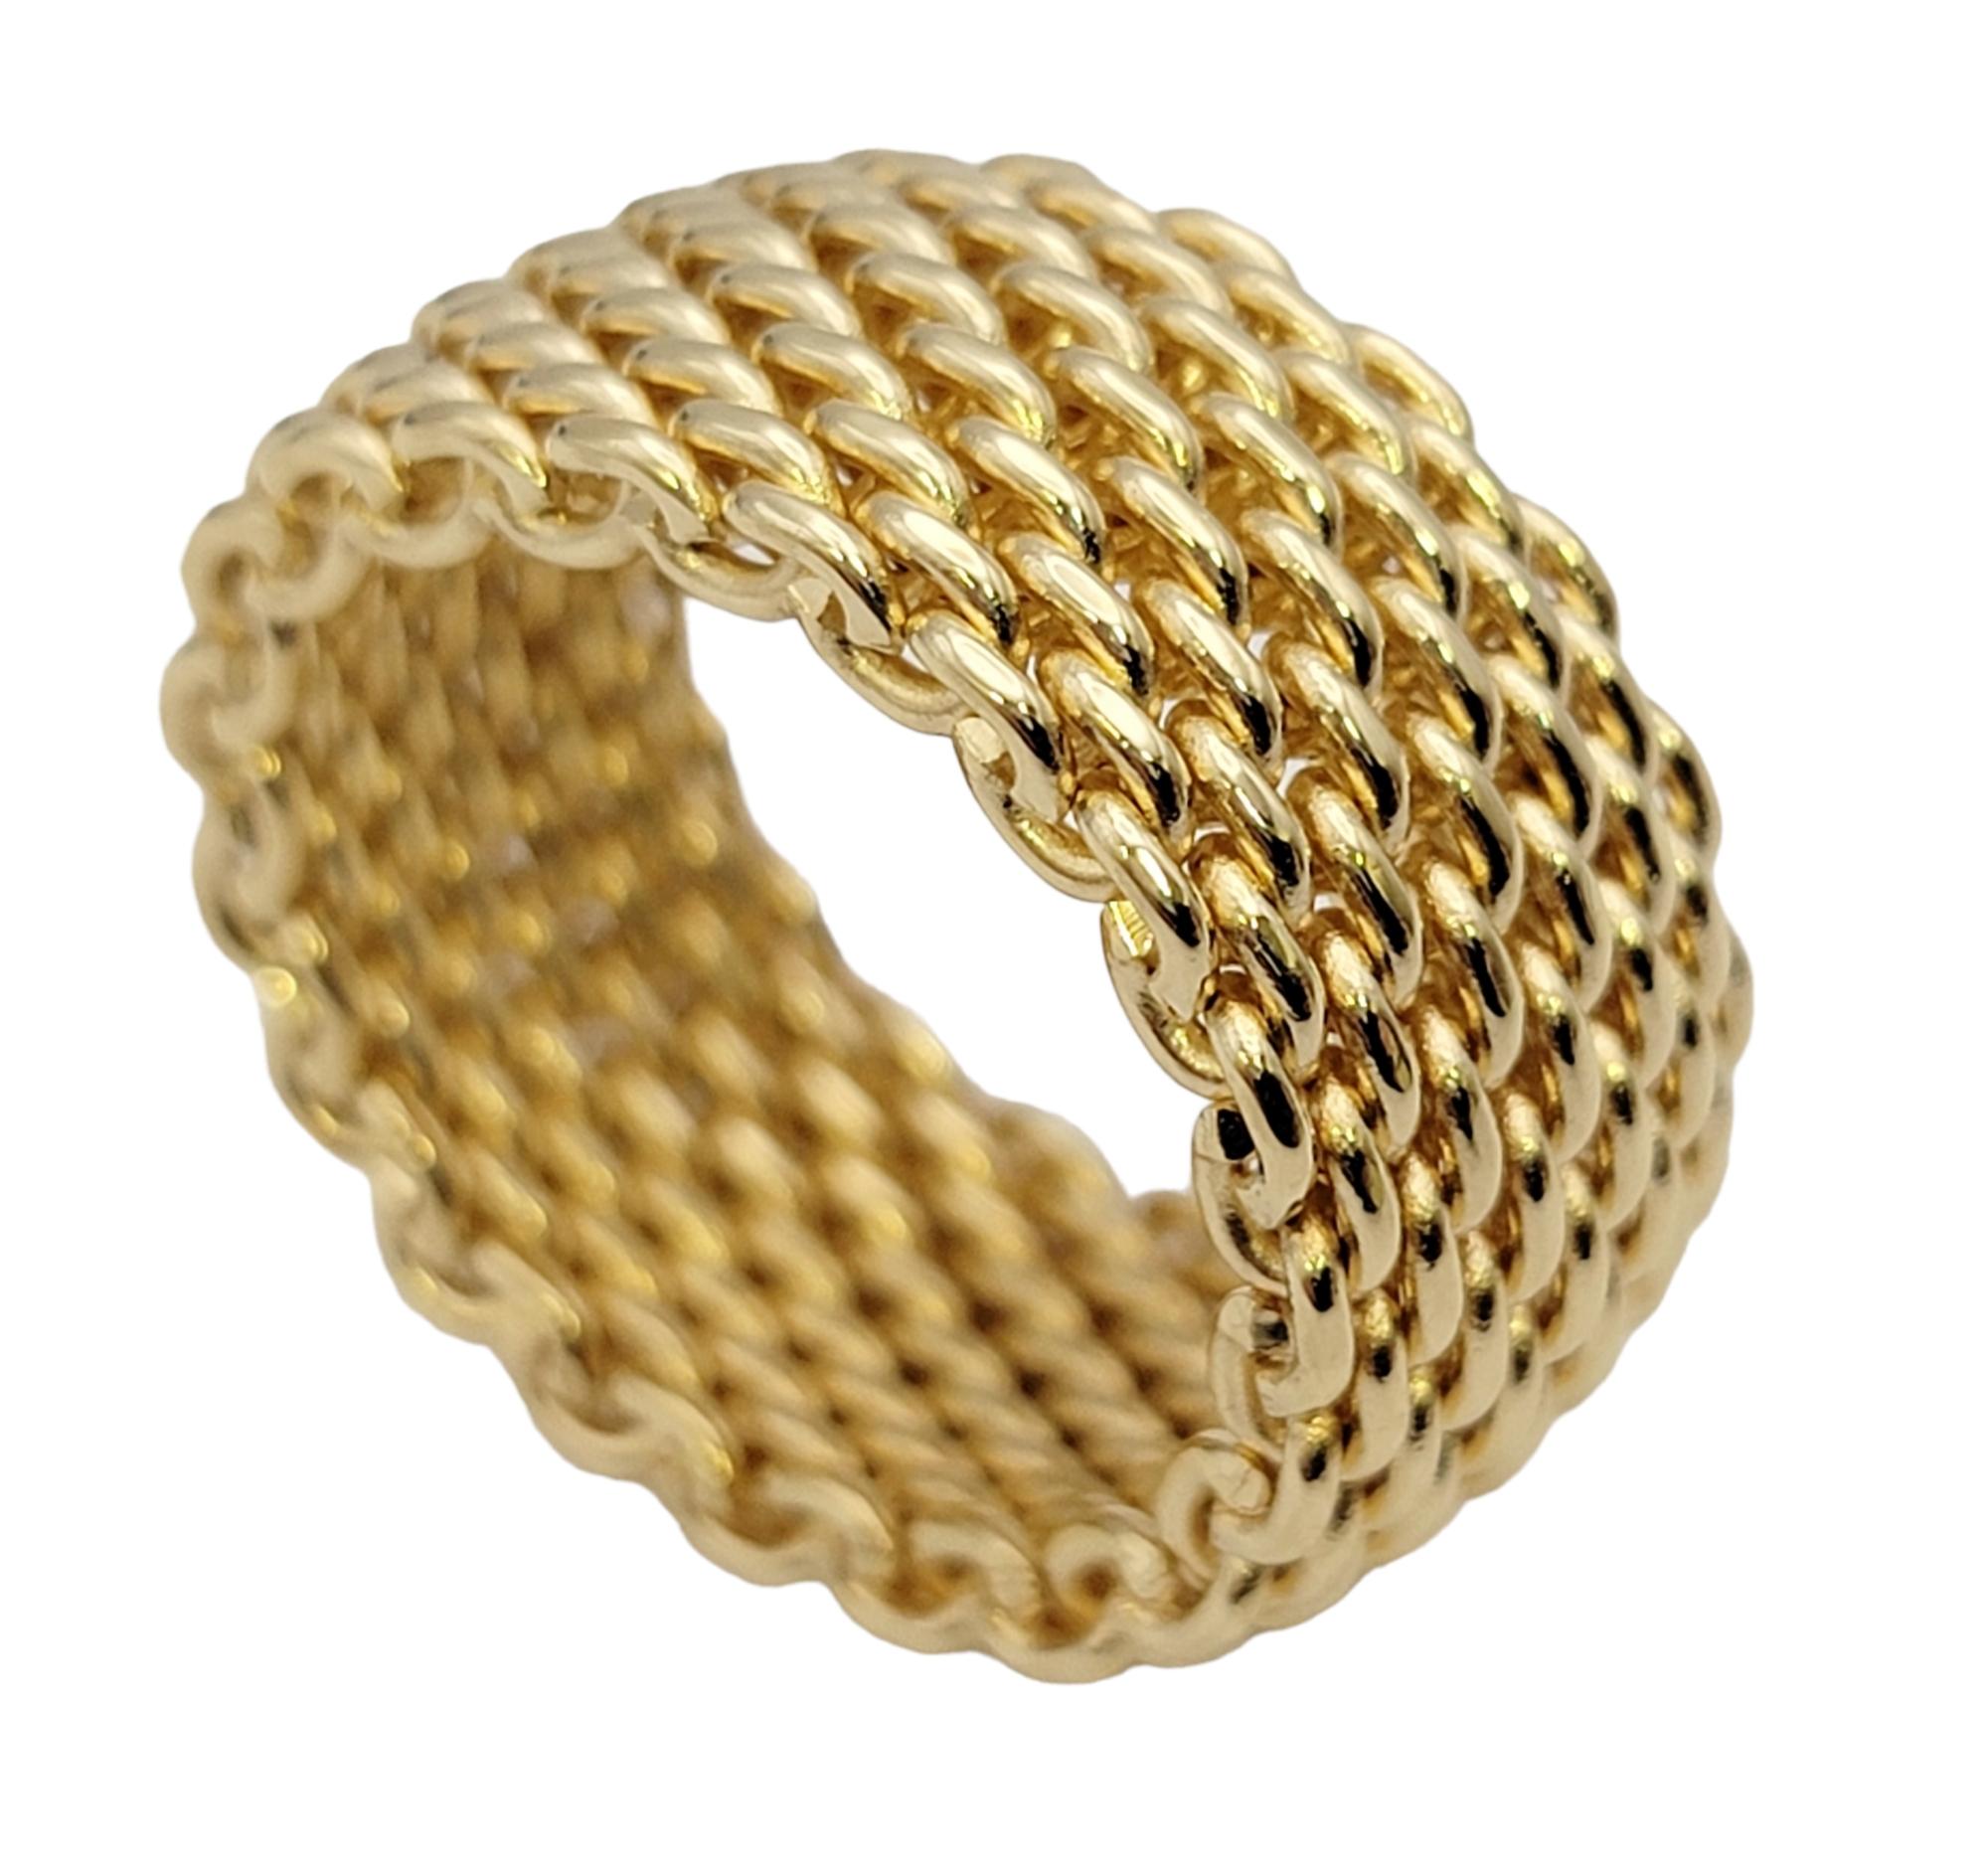 Ring size: 6.25

Simple yet stunning Somerset mesh ring by renowned jeweler, Tiffany & Co. The 18 karat yellow gold flexible mesh band boasts a sophisticated feel, while the classic simplicity gives it a timeless elegance. 

Metal: 18K Yellow